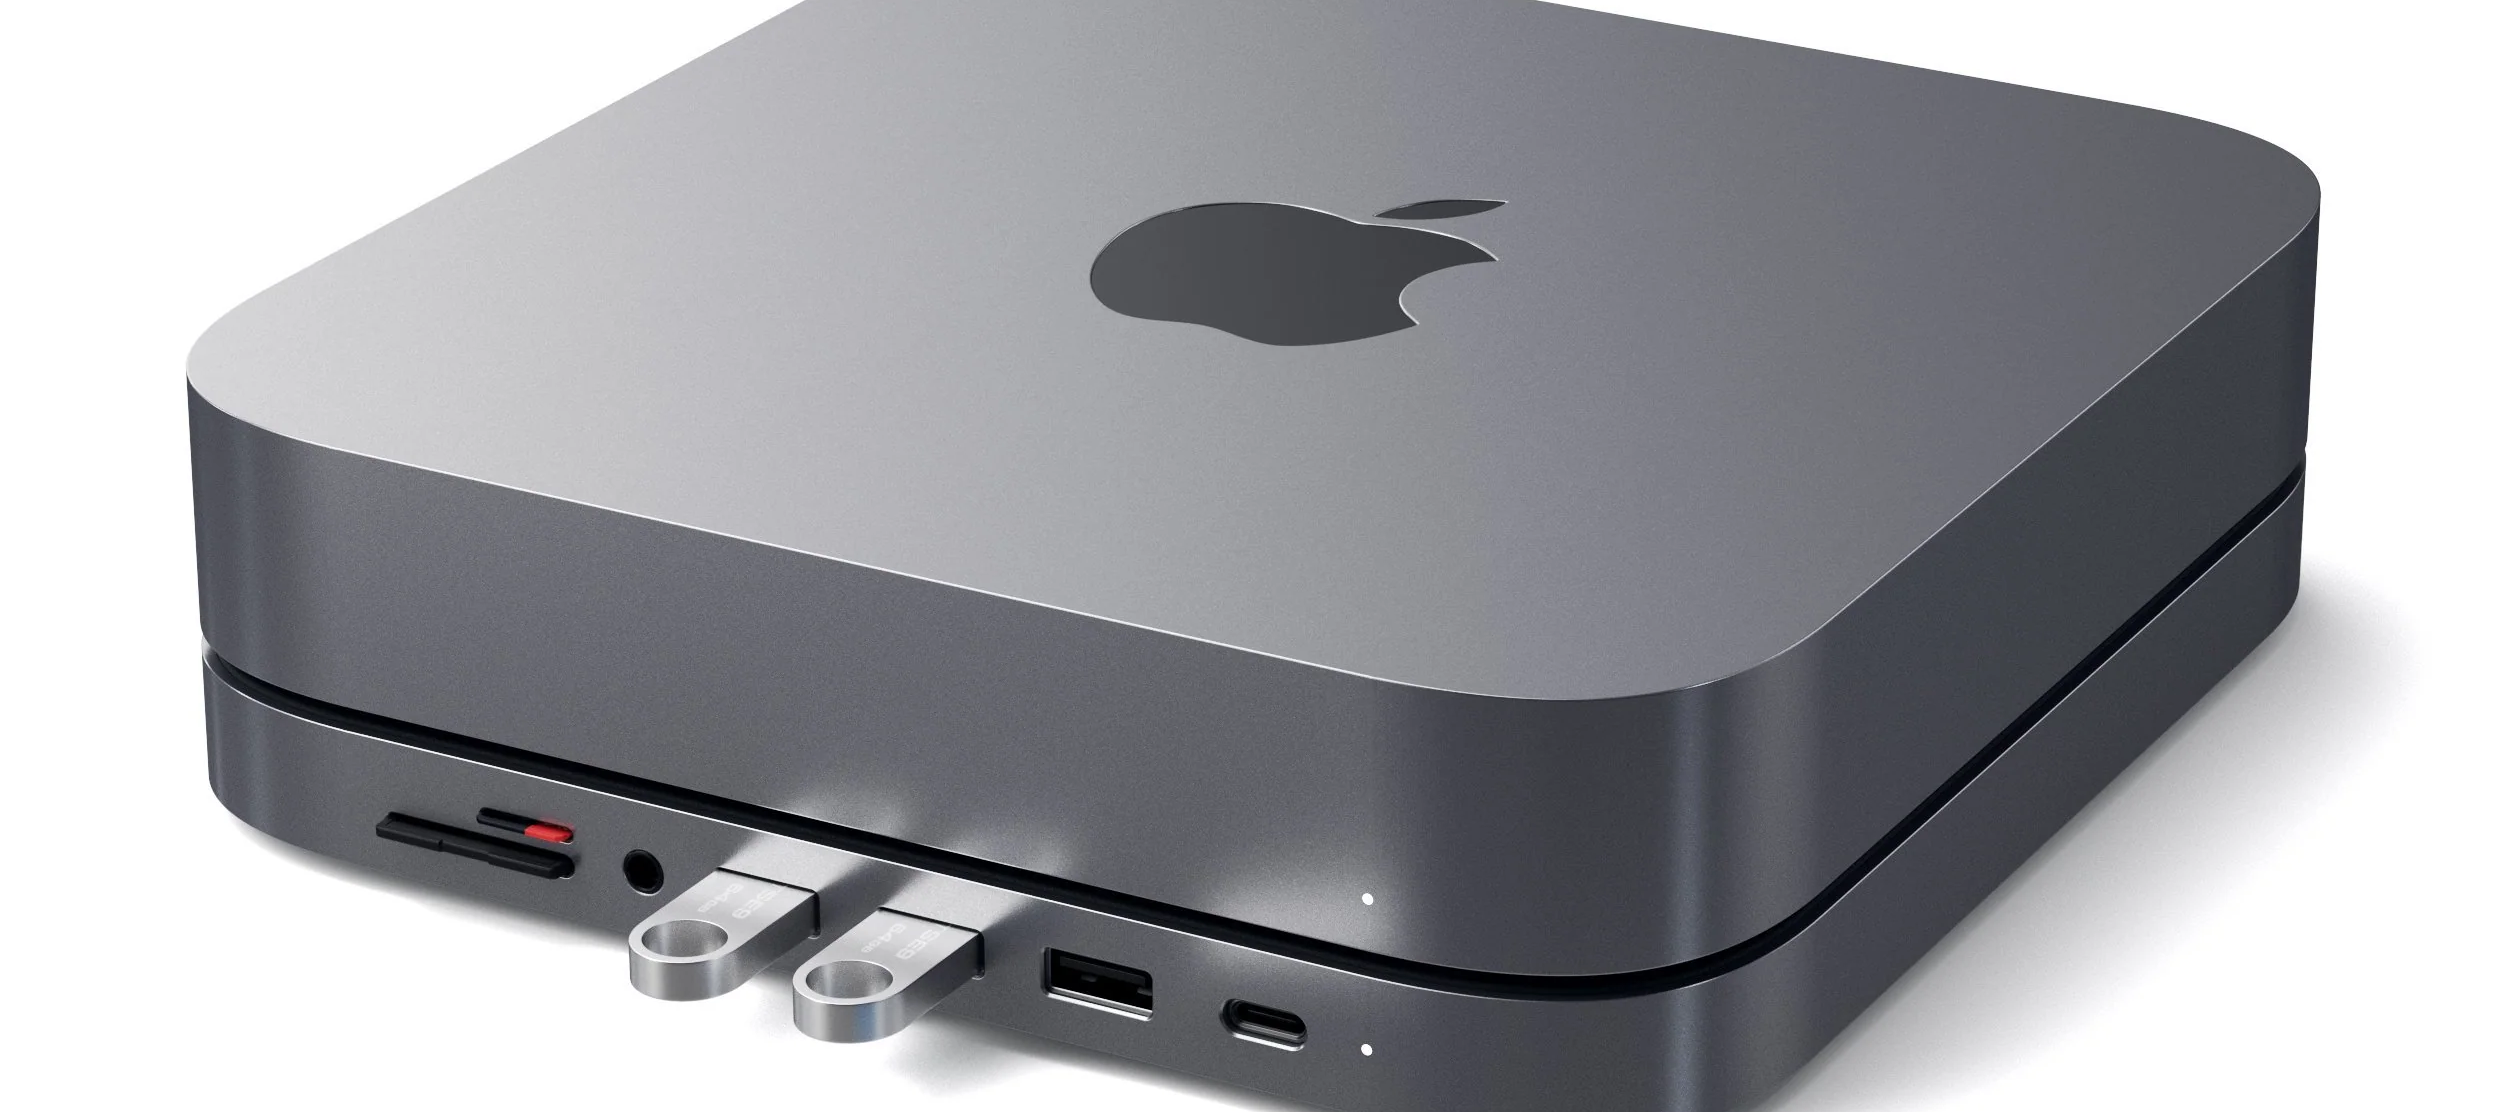 M1 Mac mini review: The Mac with the best ever bang for your buck